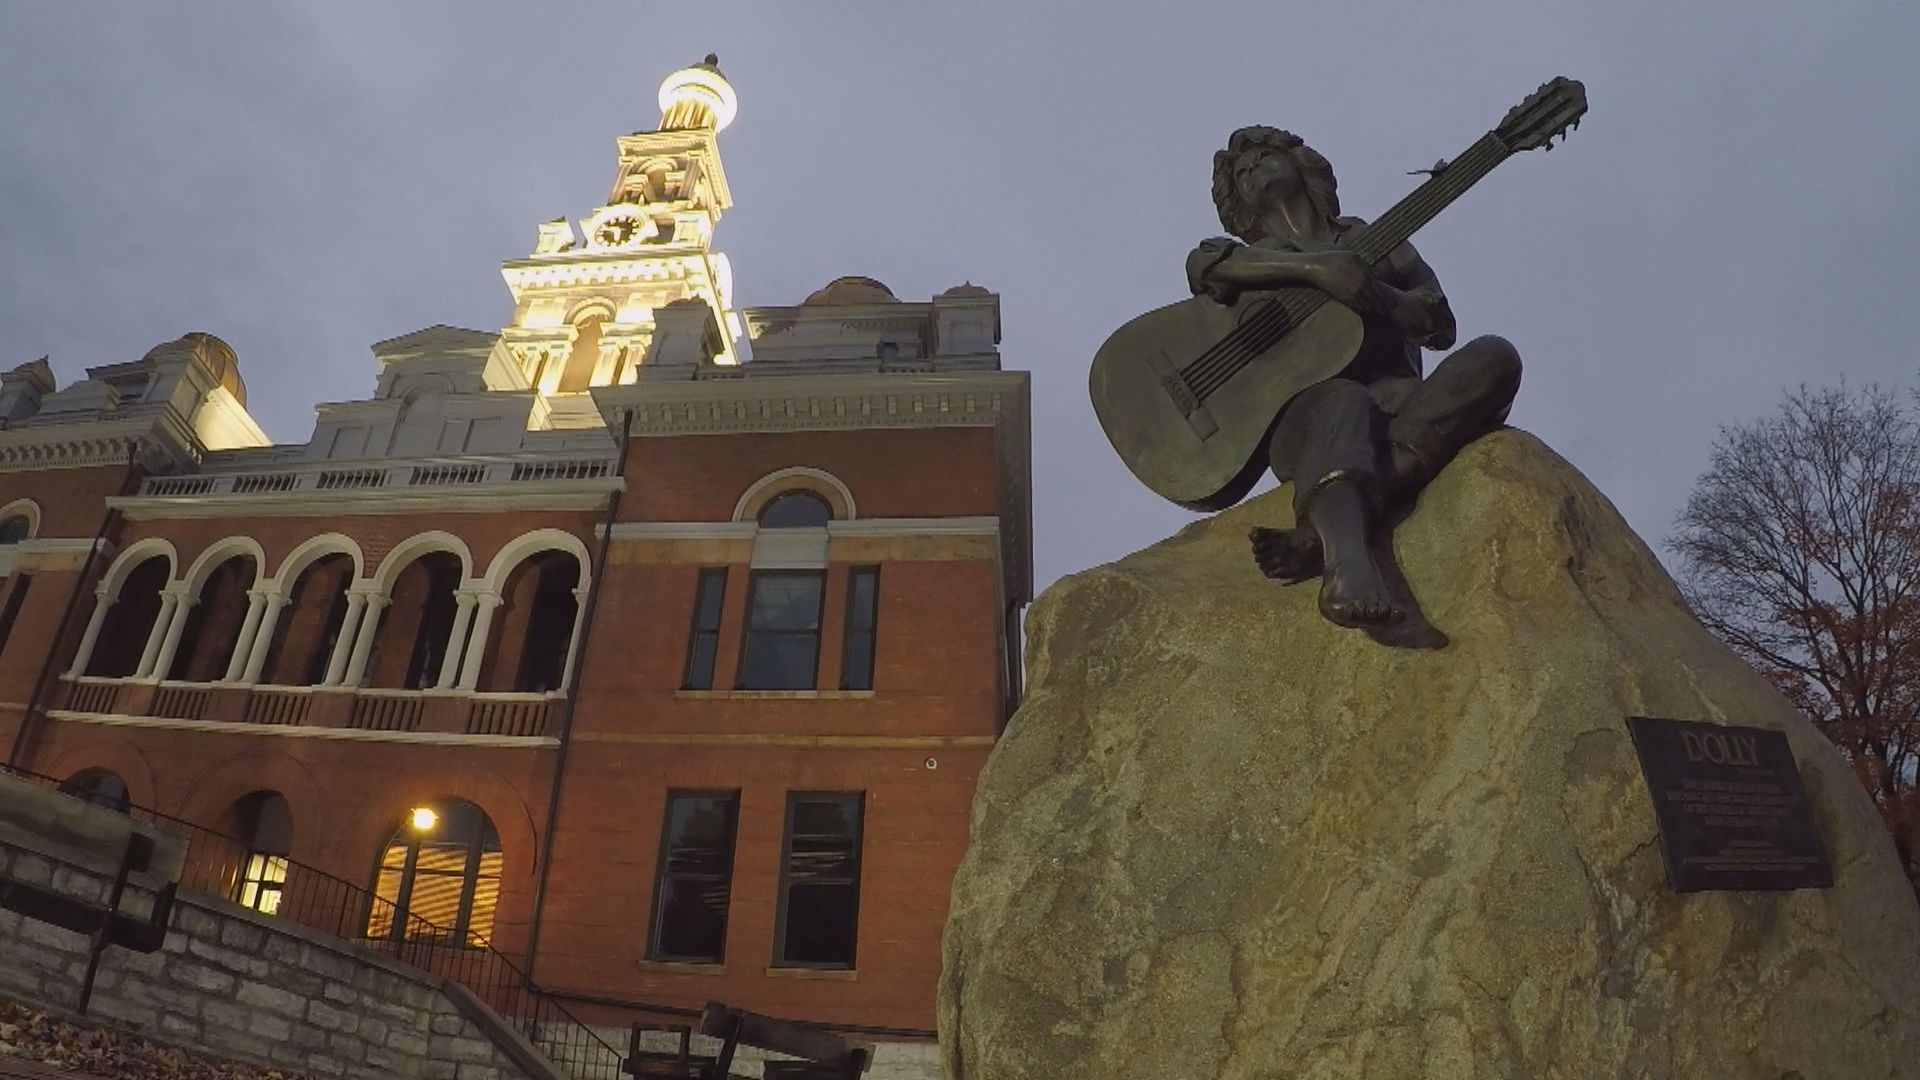 The Ken Burns documentary on Country Music was noteworthy in 2019. Here's how the old tunes could carry East Tennessee tourism in 2020.